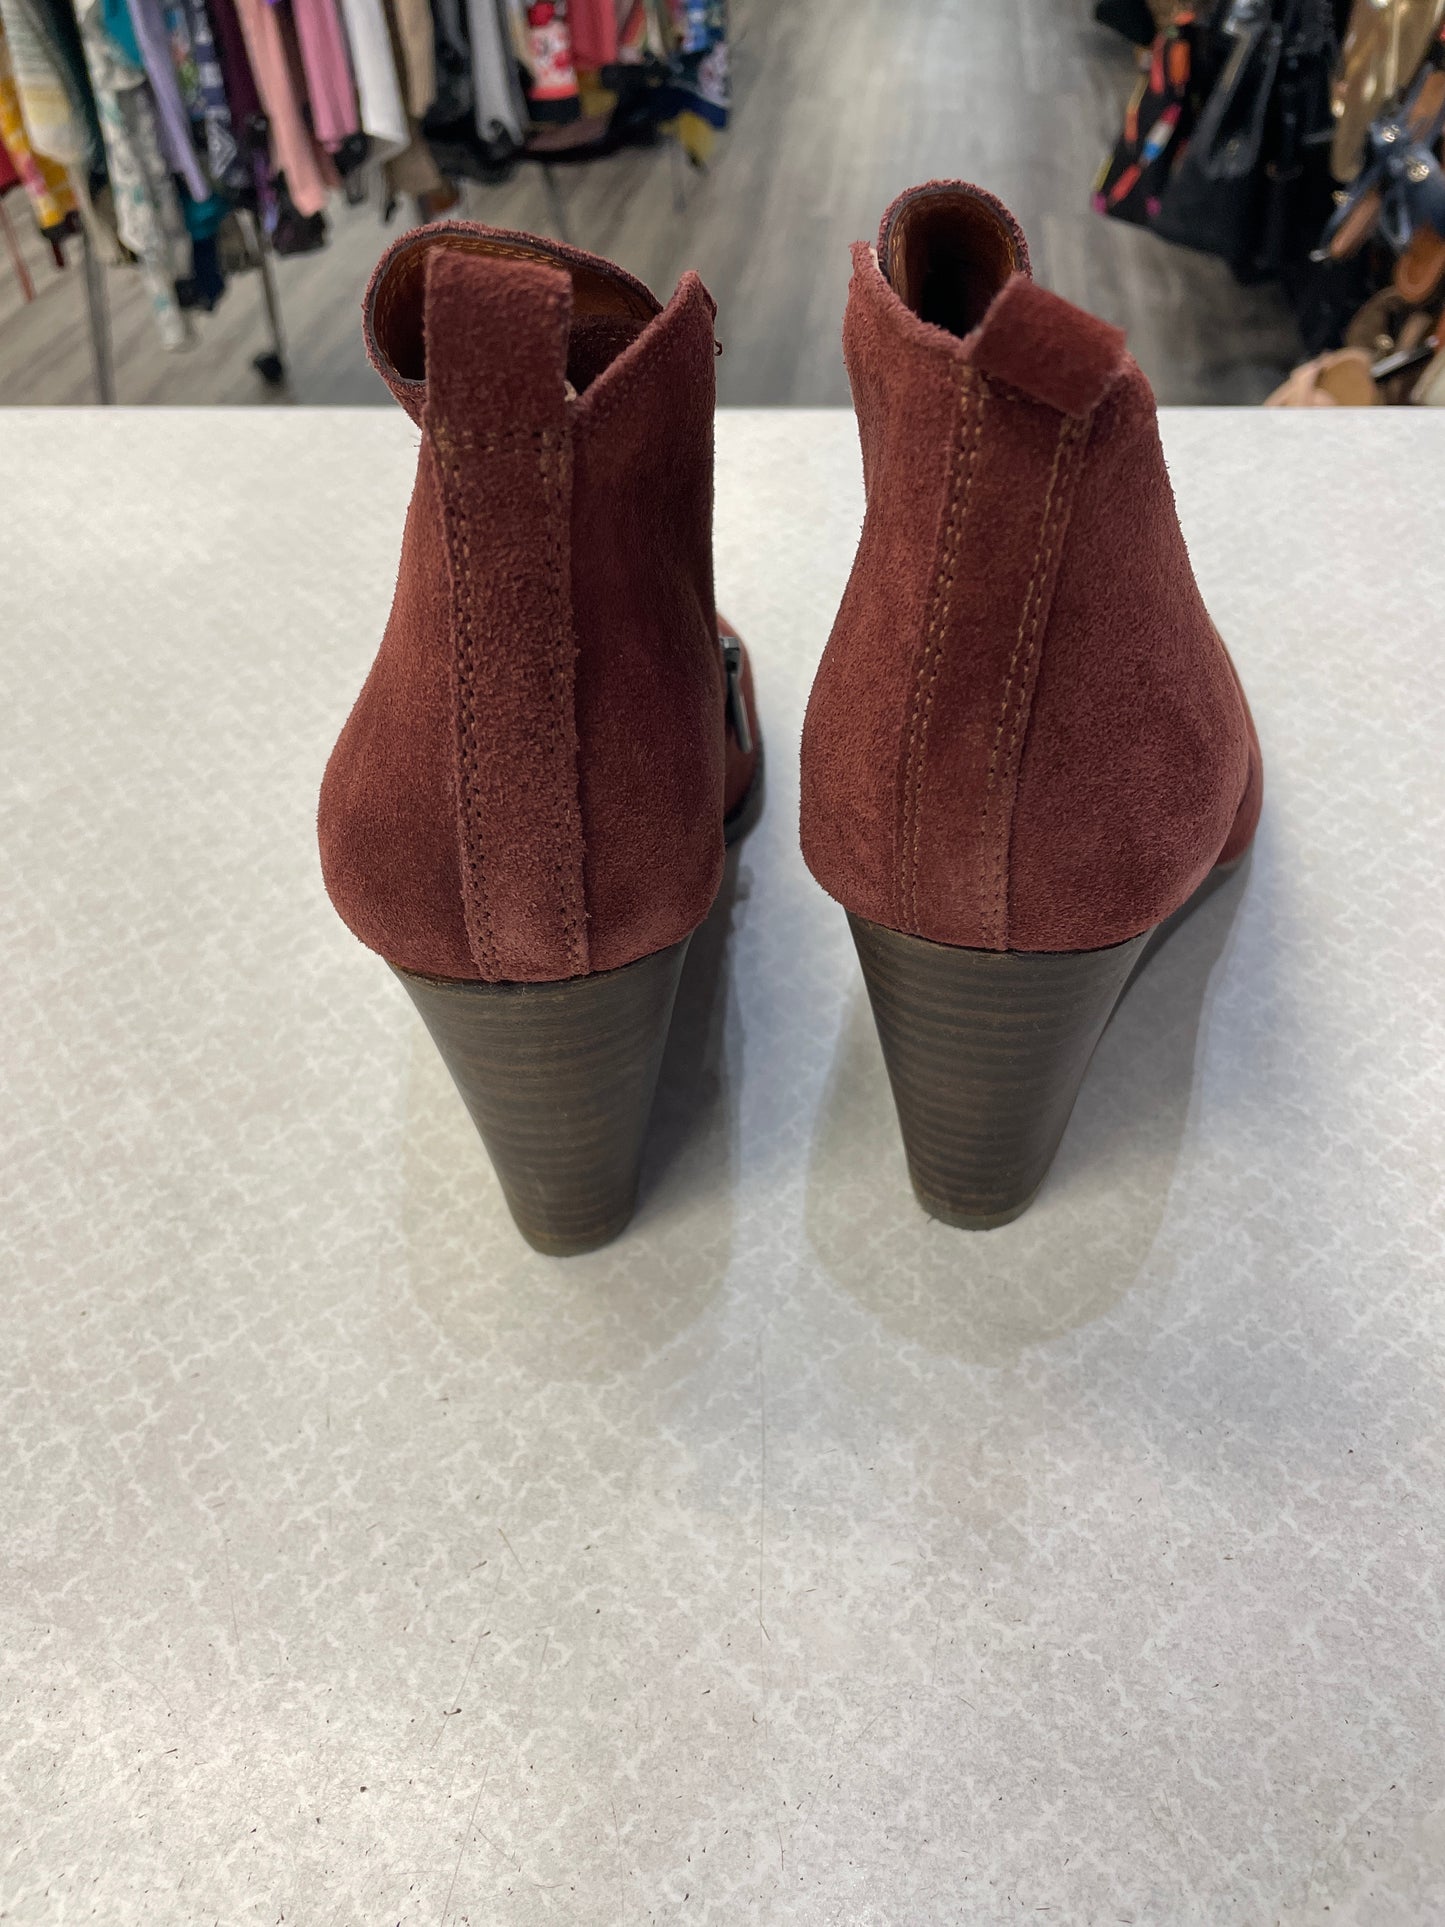 Shoes Heels Platform By Lucky Brand  Size: 9